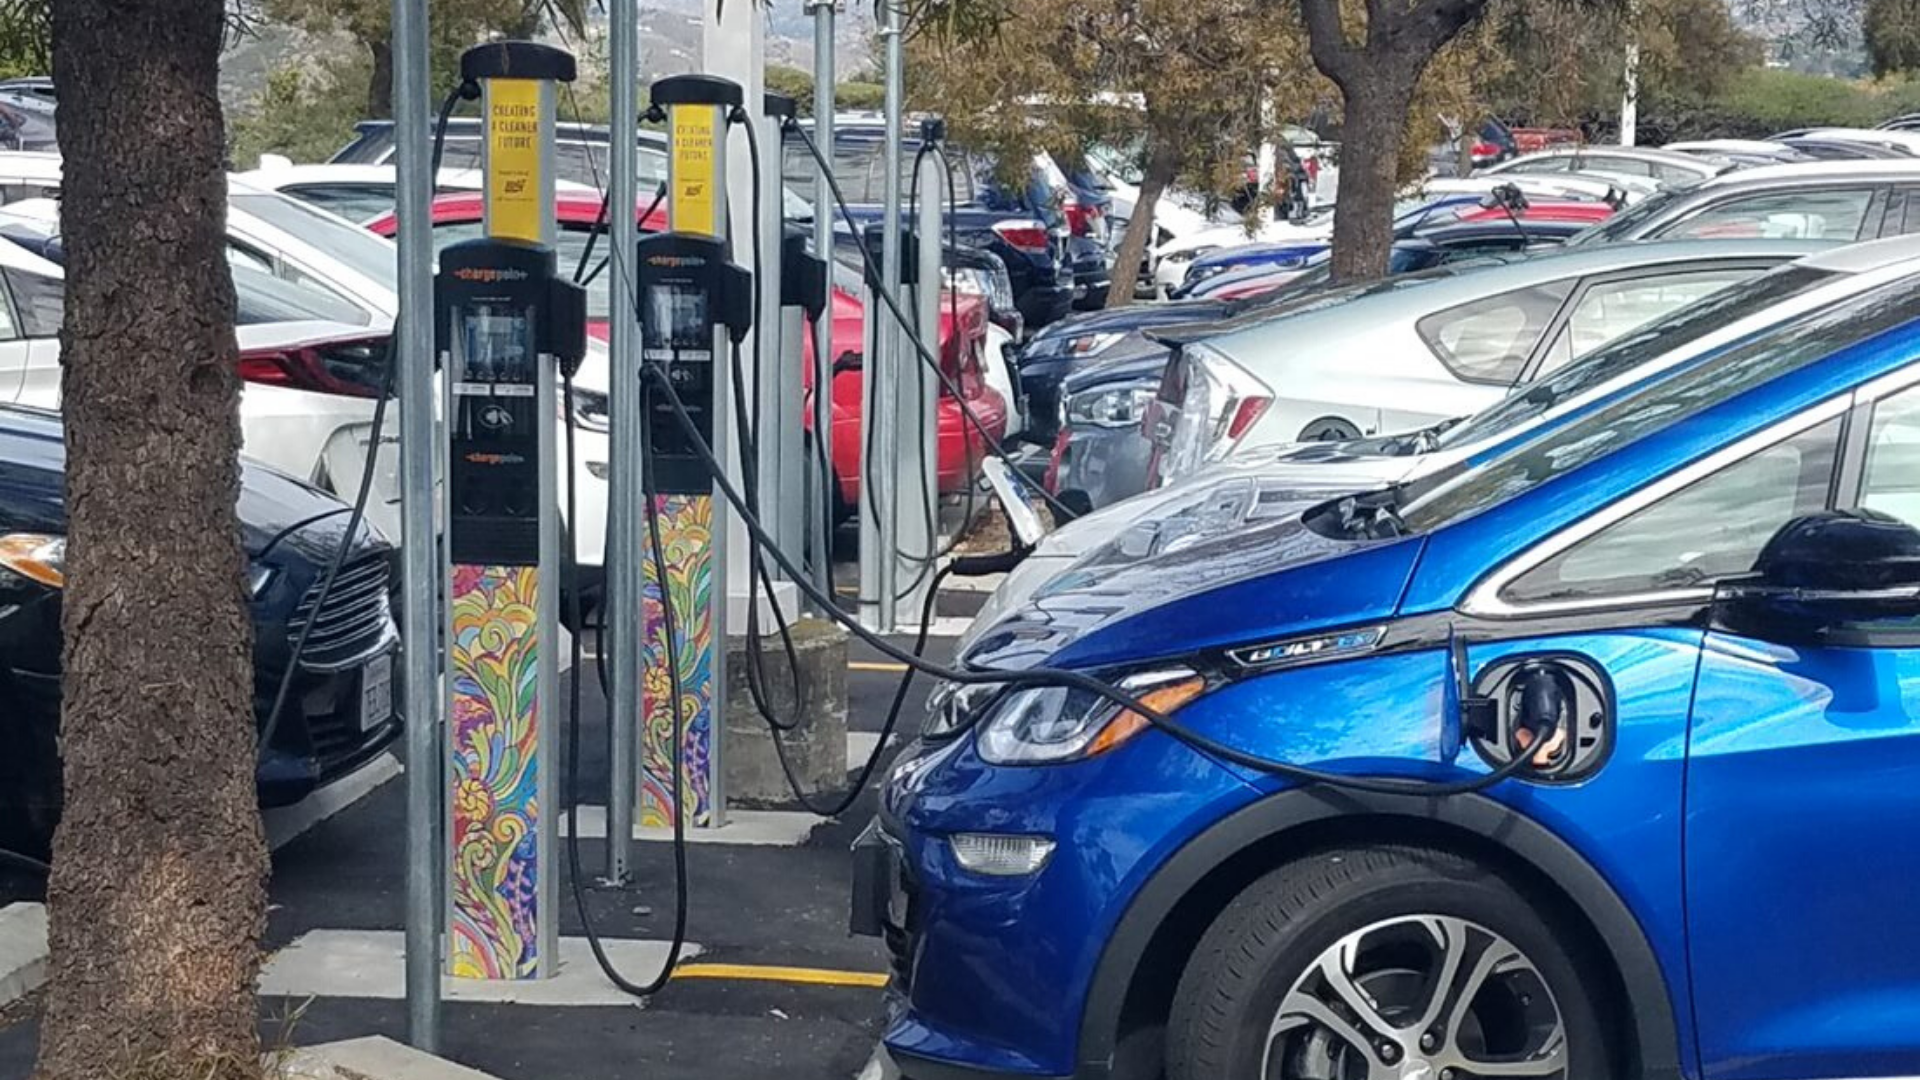 Cars charging at electric vehicle chargers provided by SDG&E.